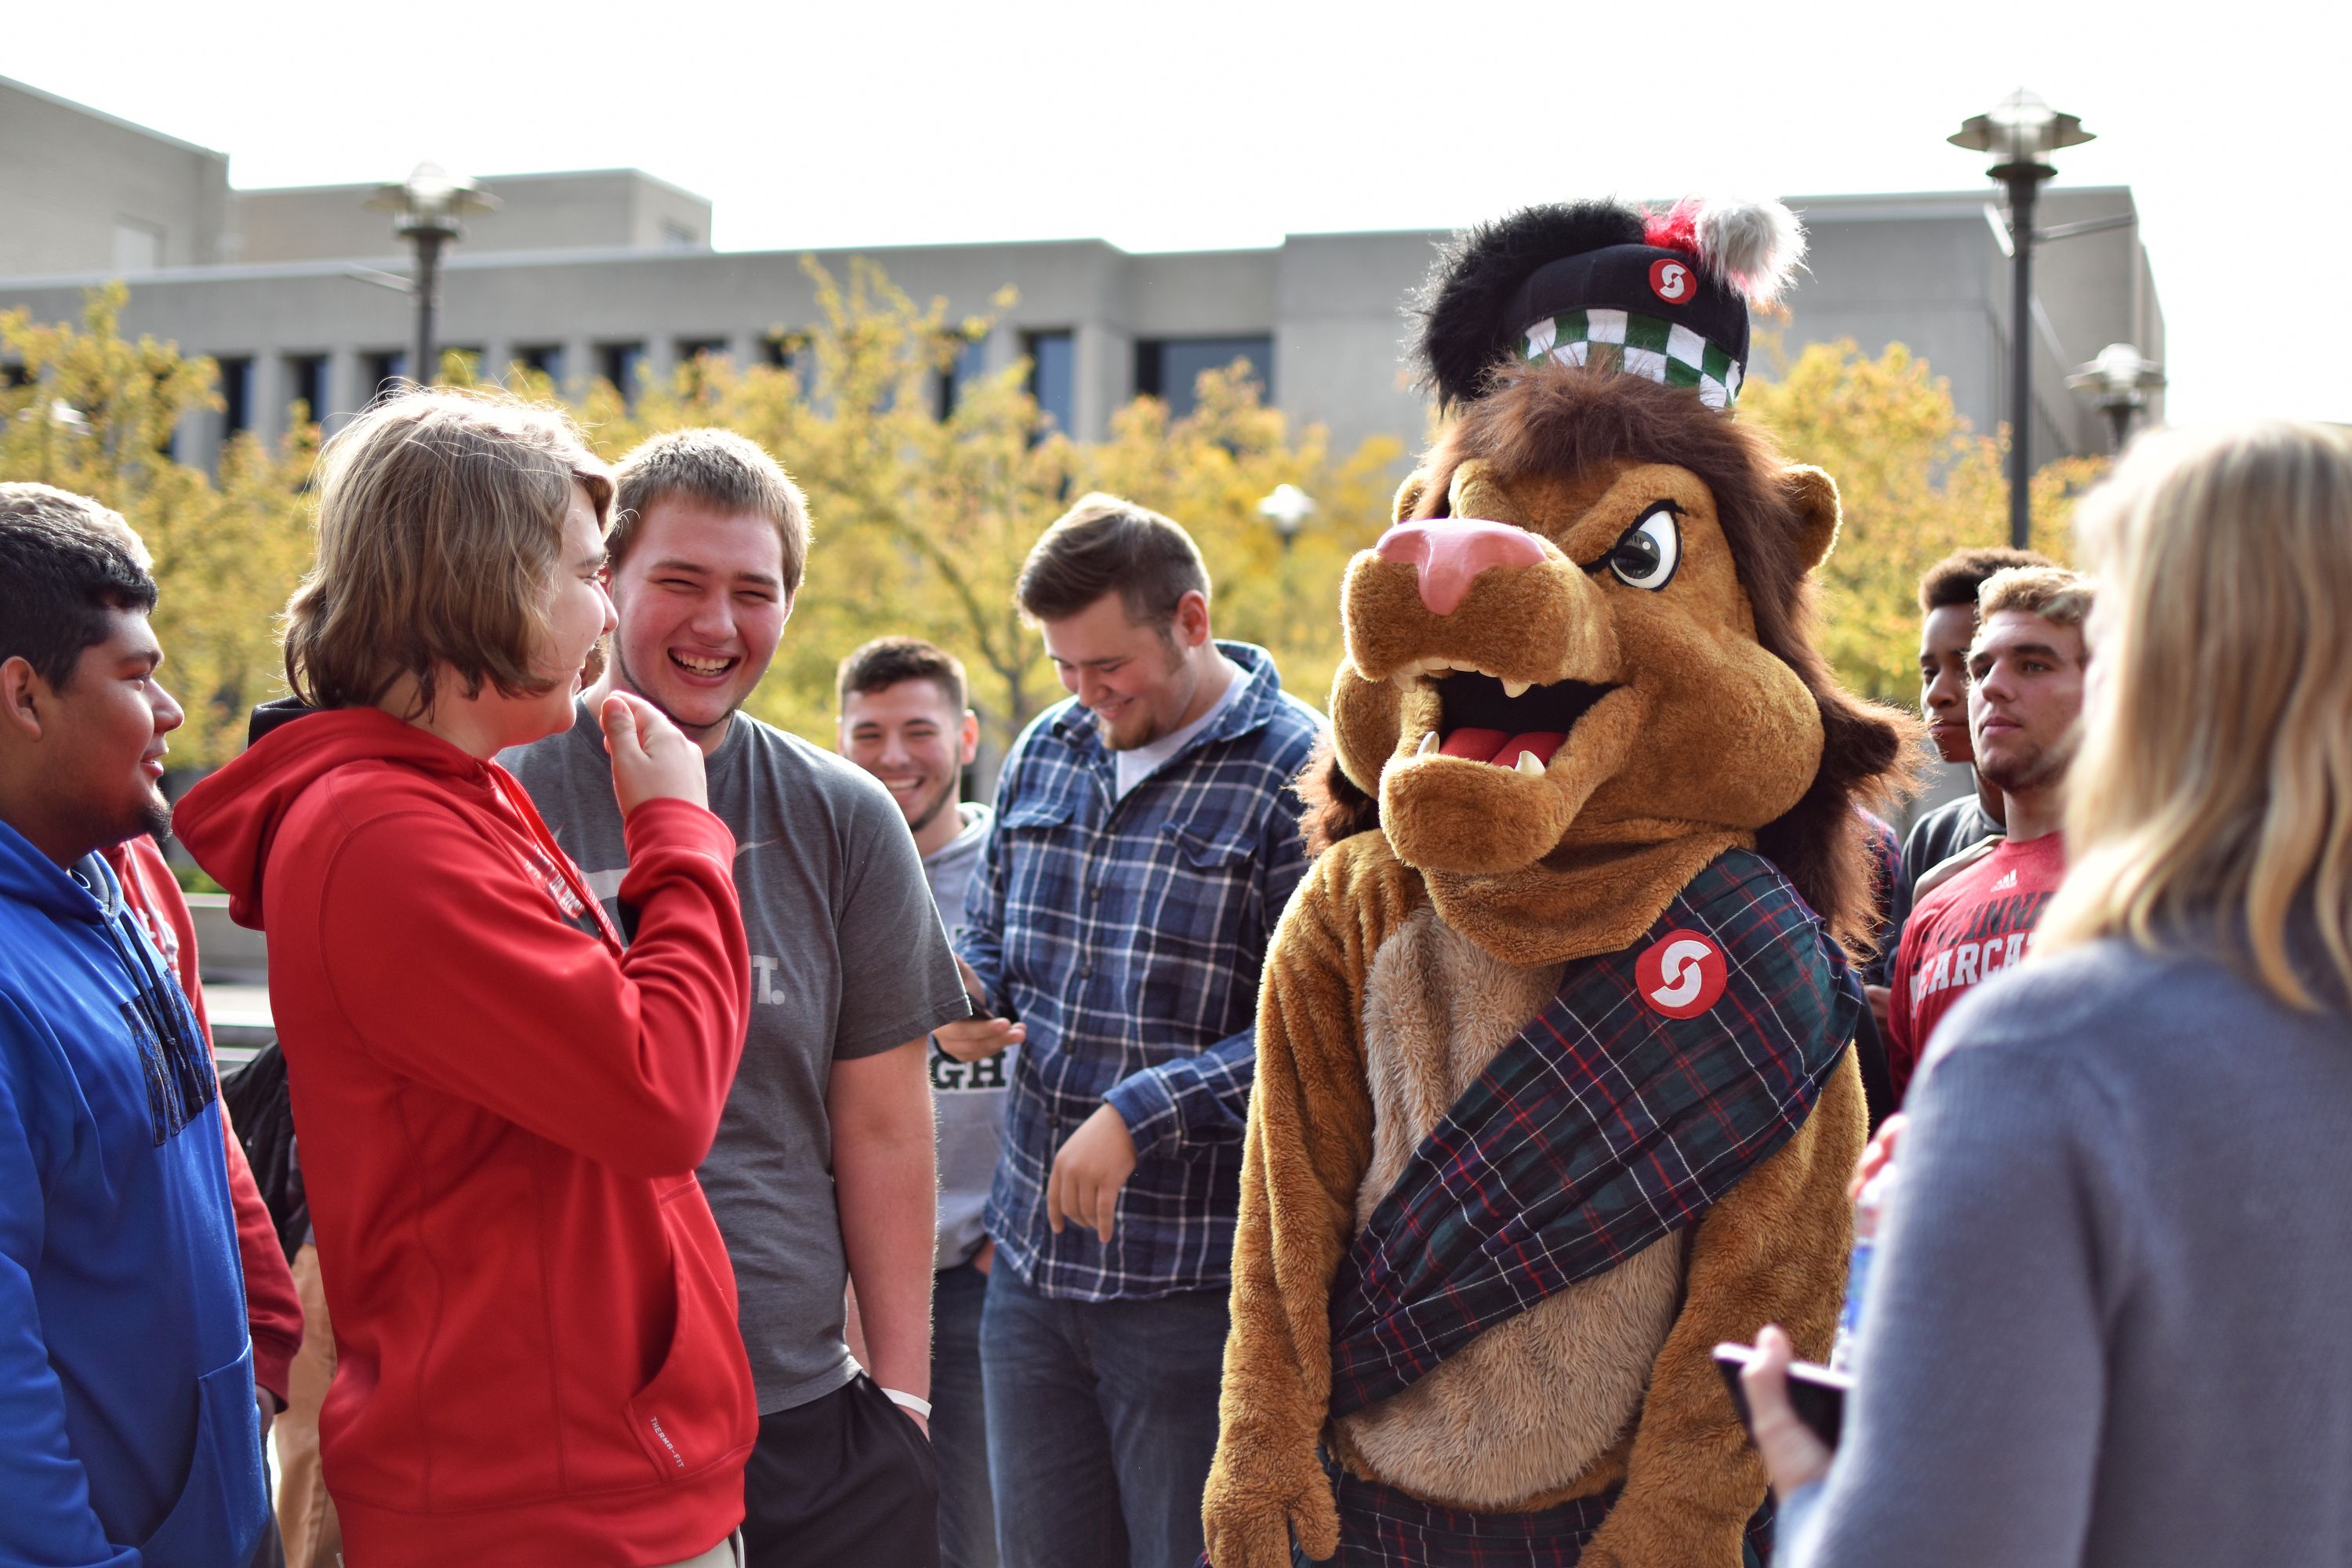 Students and Sinclair's mascot standing in campus plaza.